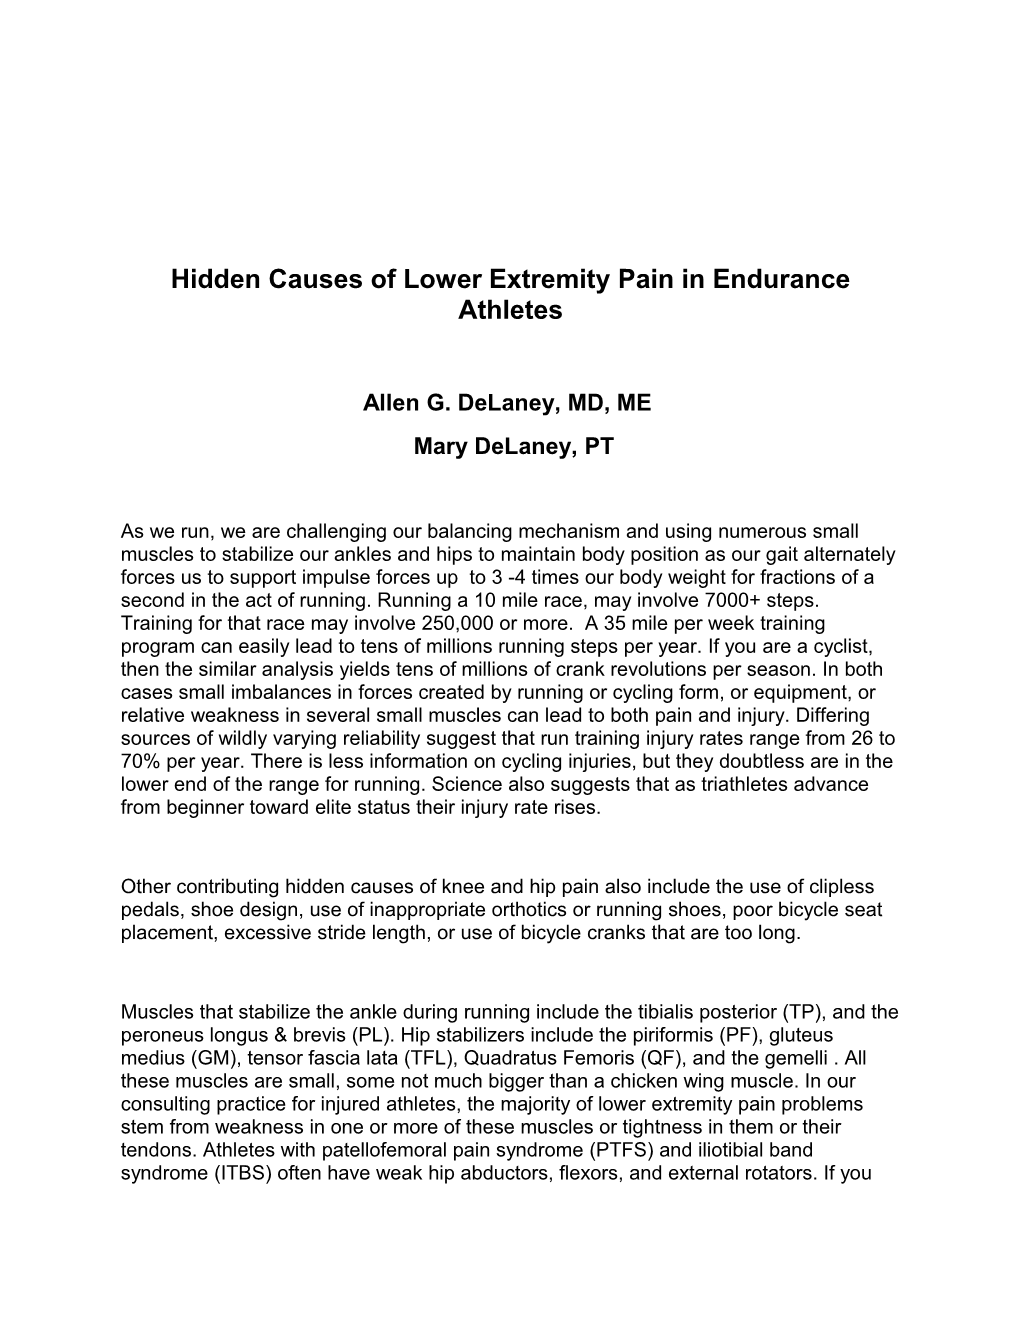 Hidden Causes of Lower Extremitypain in Endurance Athletes